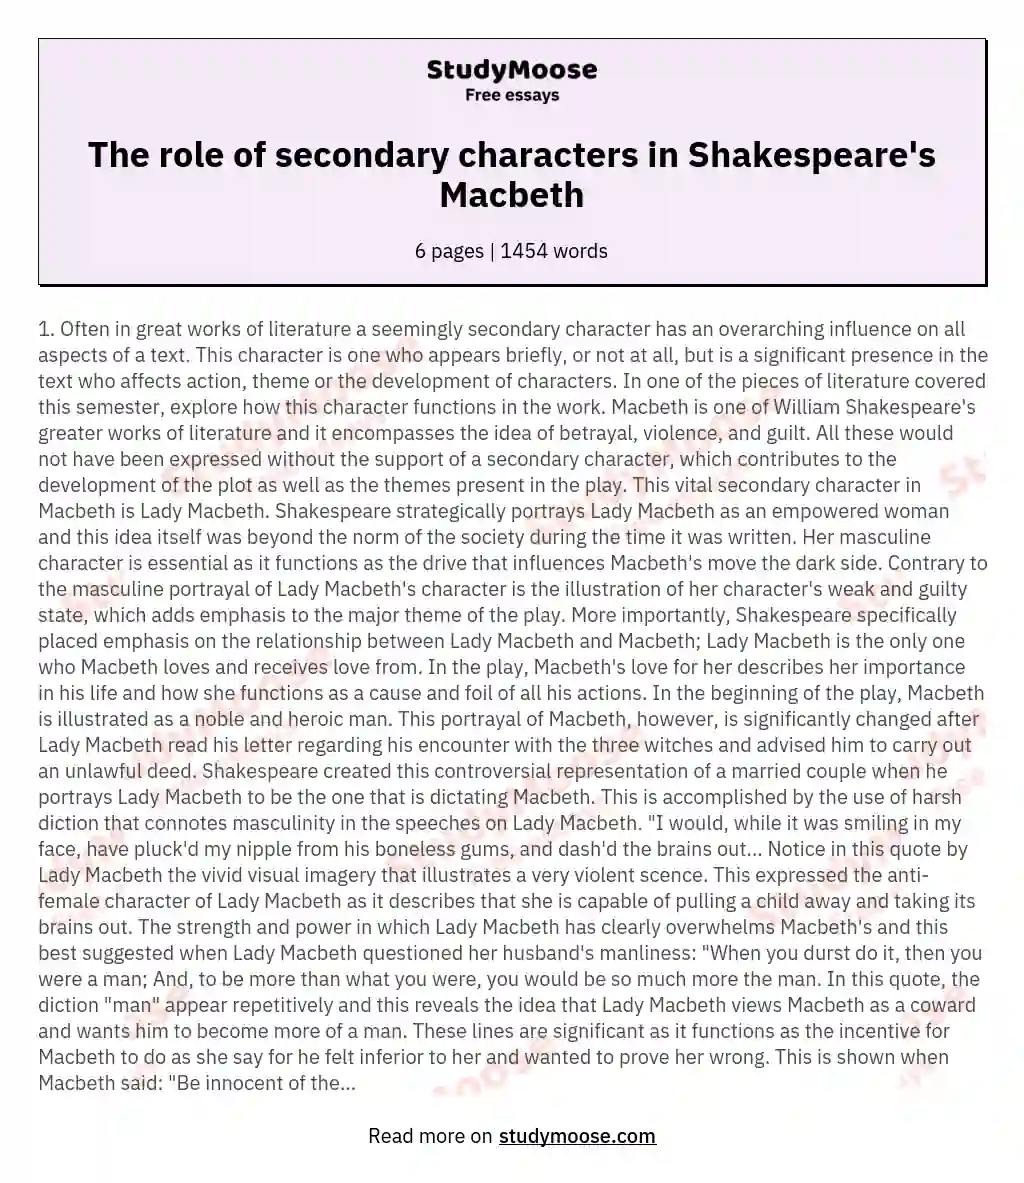 The role of secondary characters in Shakespeare's Macbeth essay